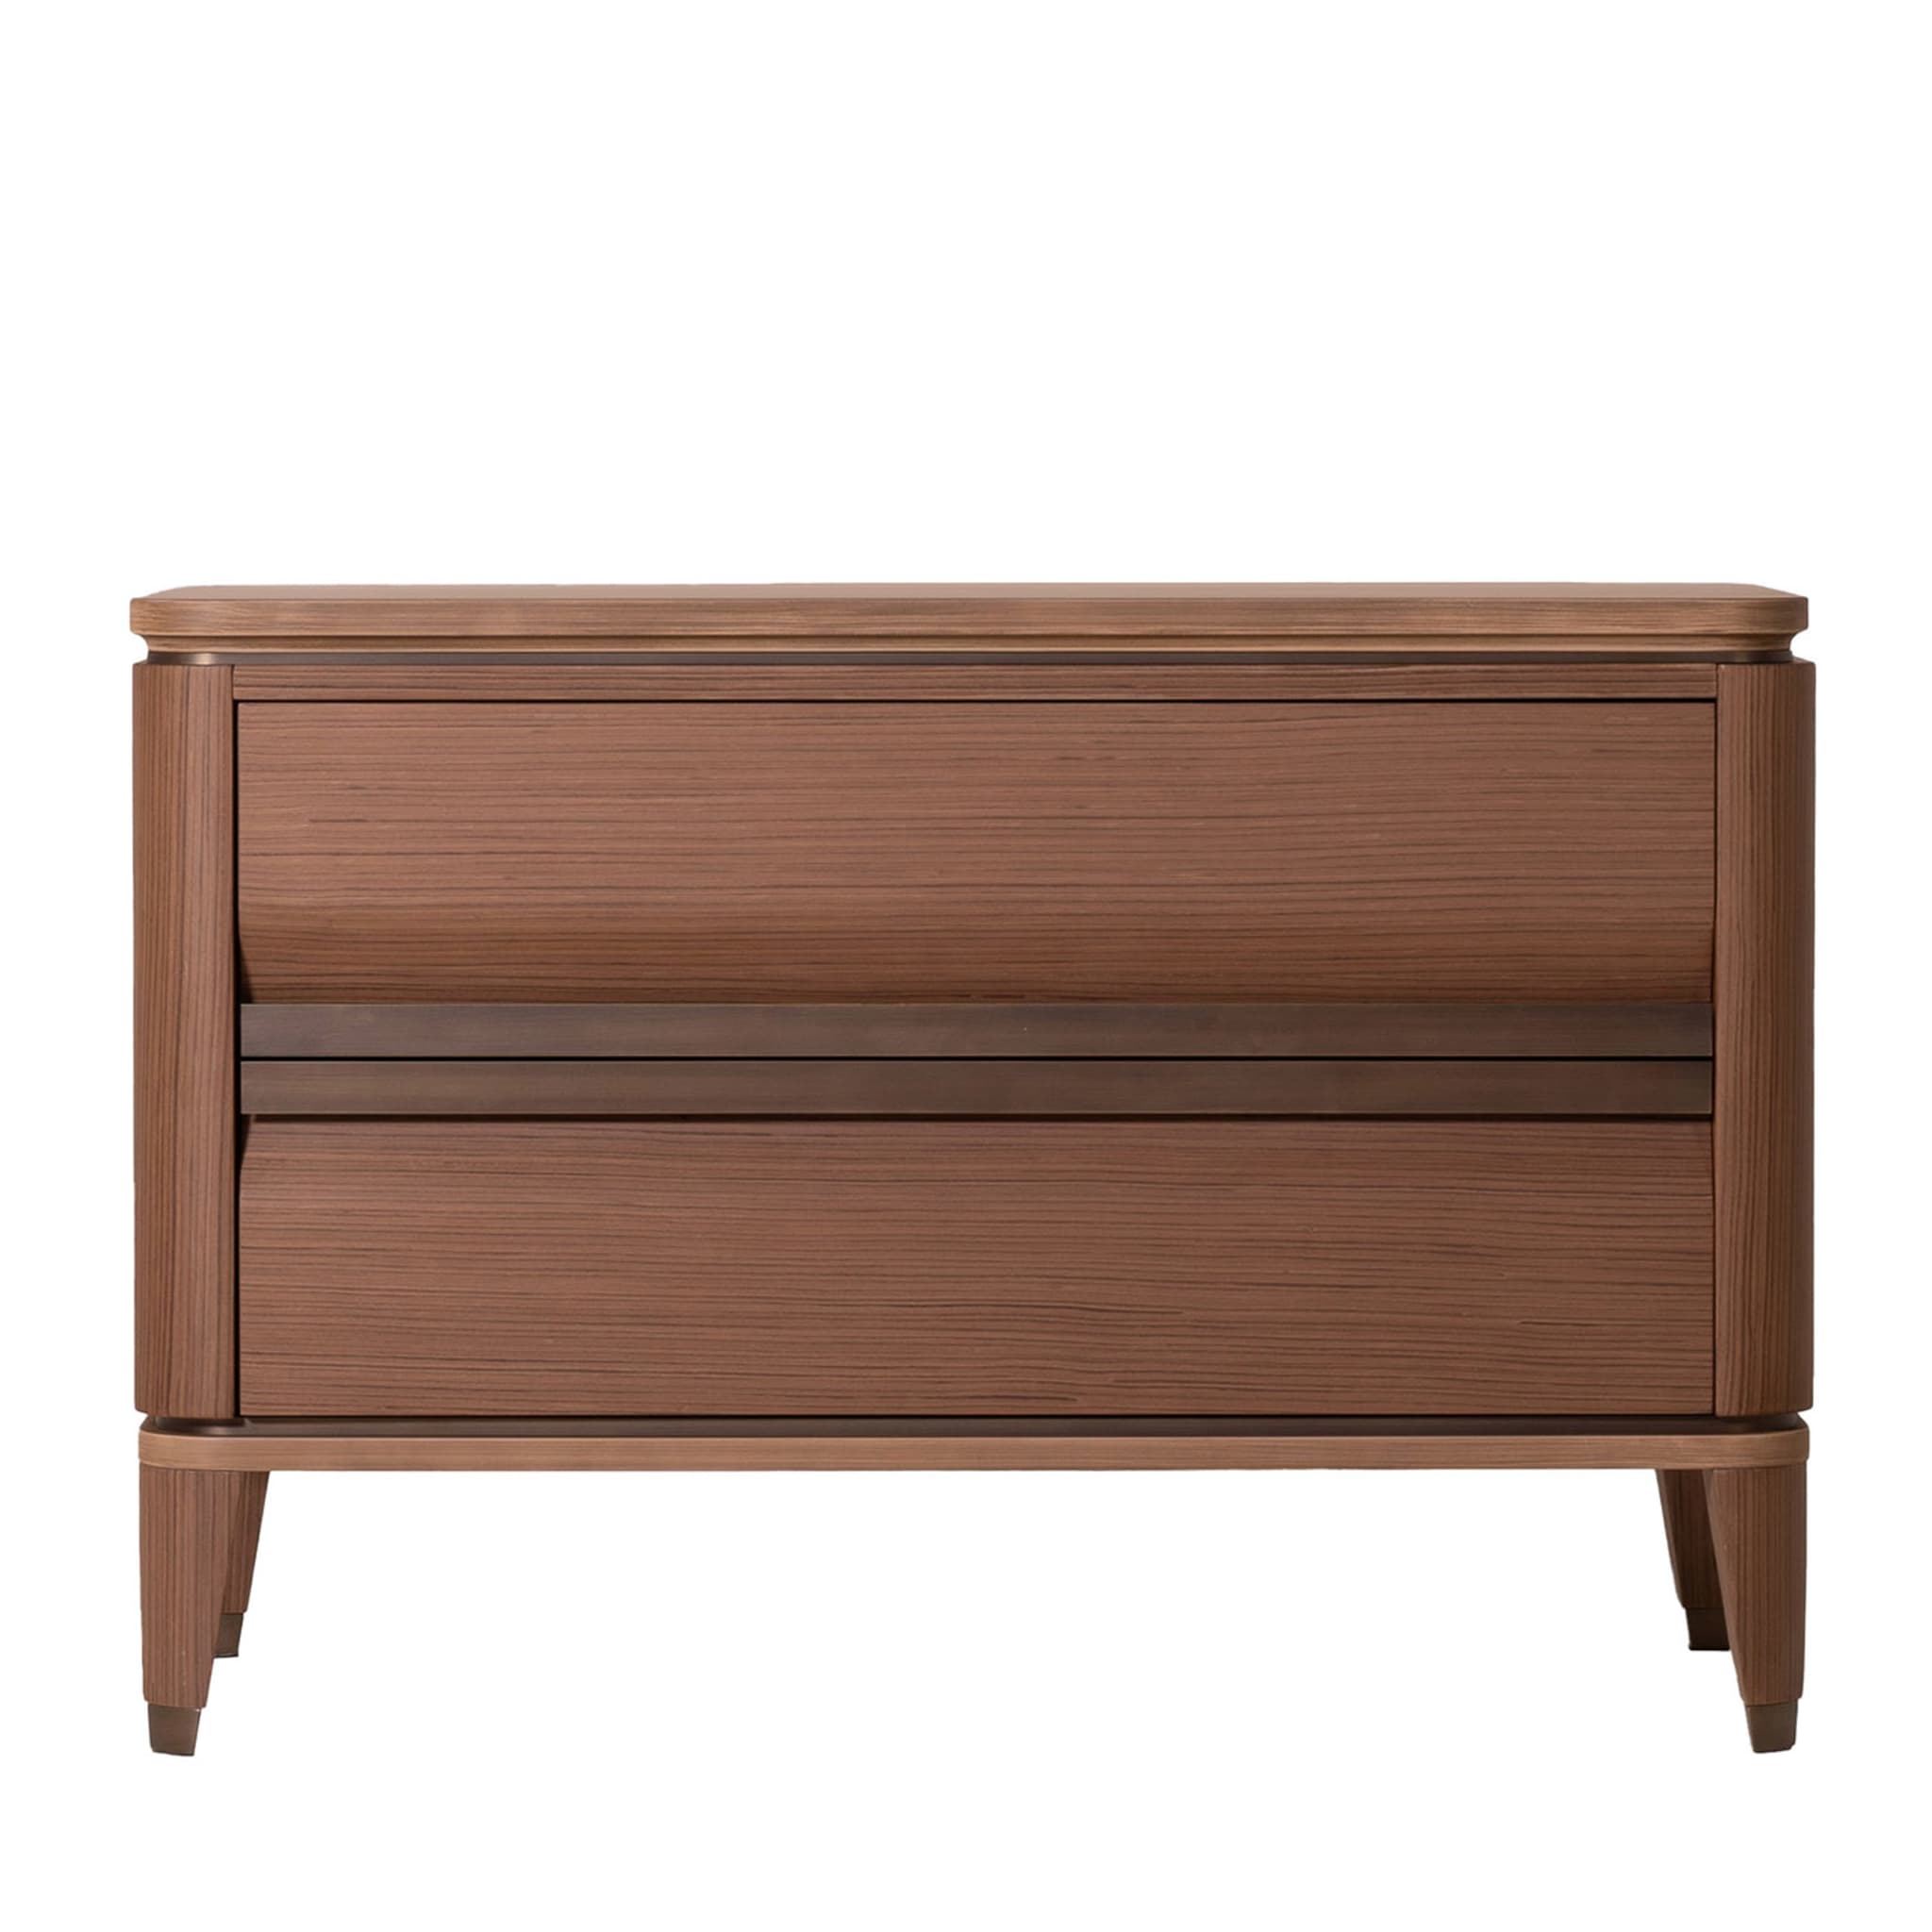 Ercolino Night Stand Extra Large with Rosewood Finish  - Main view